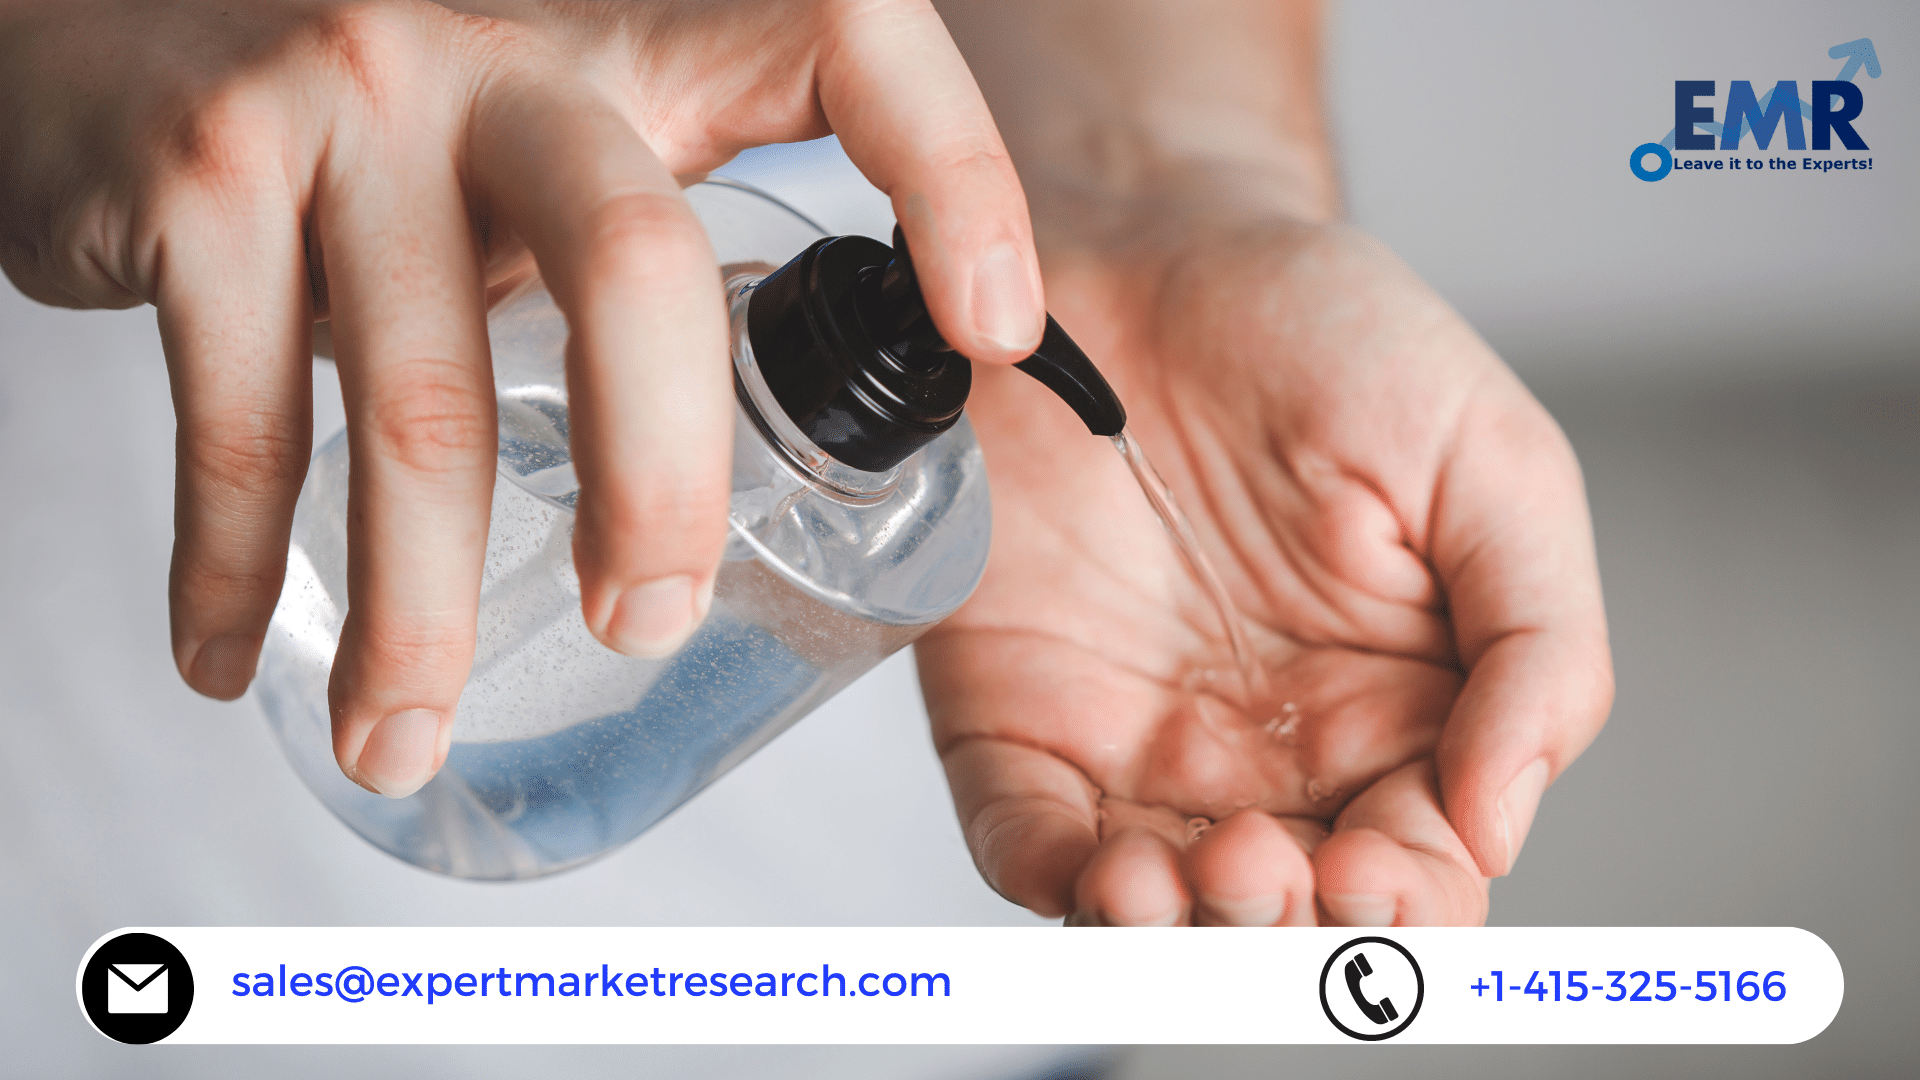 Global Hand Sanitiser Market Price, Trends, Growth, Analysis, Key Players, Outlook, Report, Forecast 2022-2027 | EMR Inc.